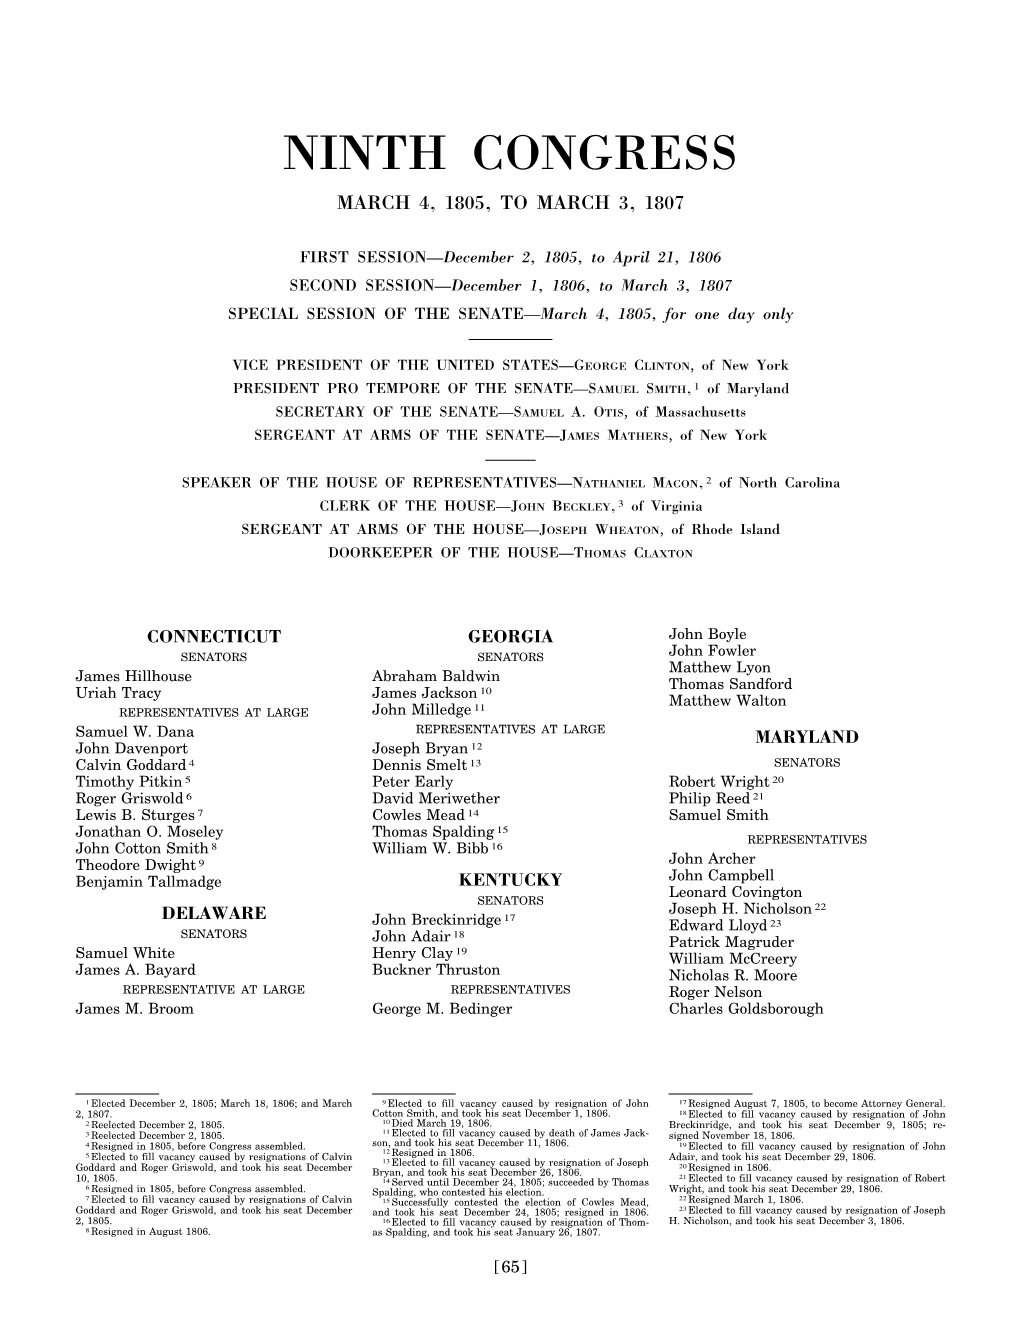 Ninth Congress March 4, 1805, to March 3, 1807